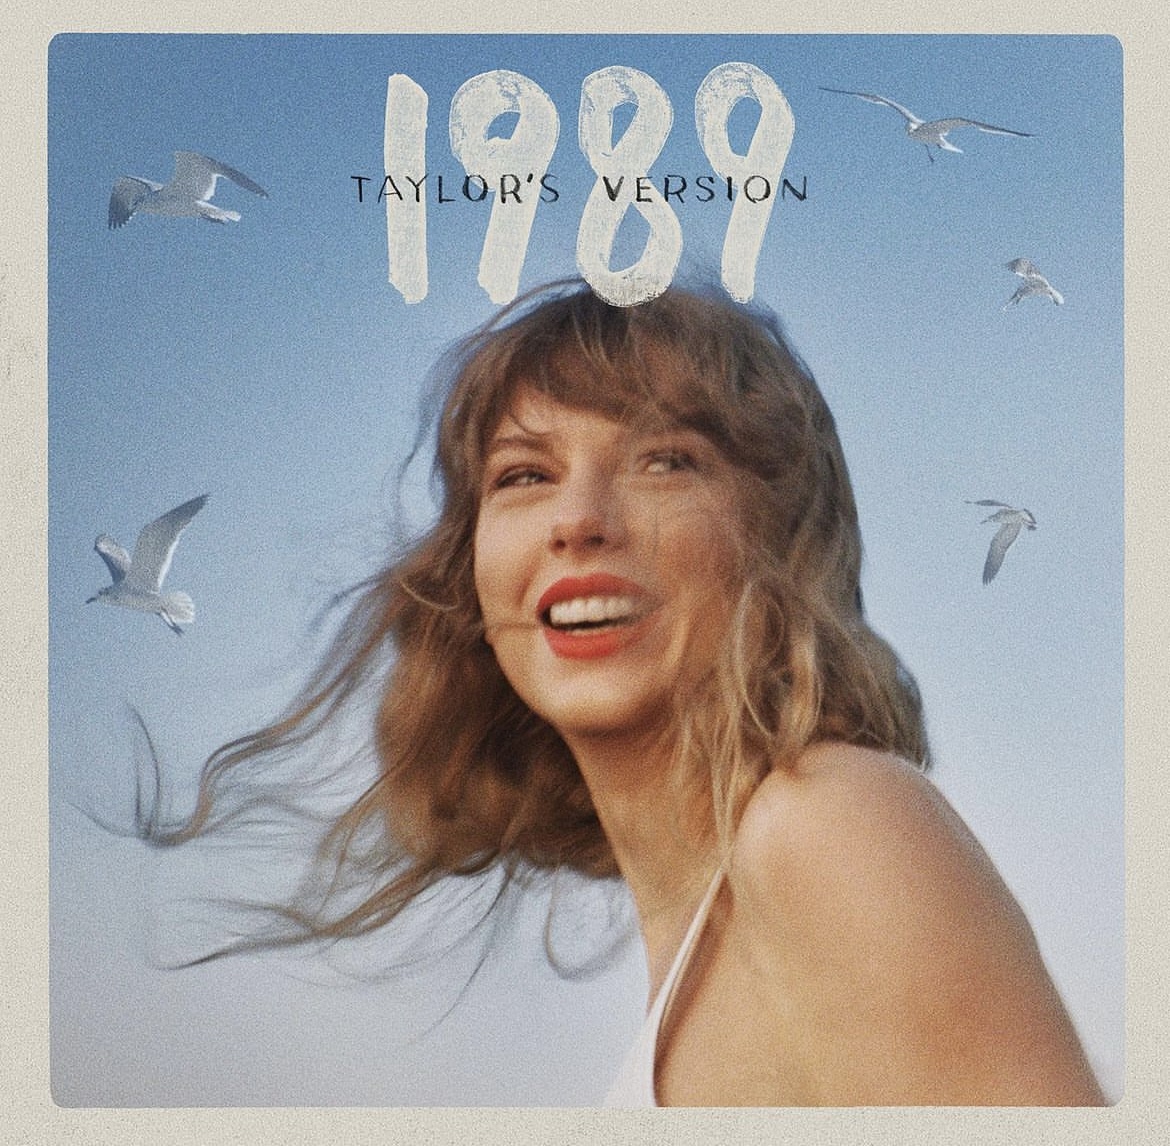 On October 27, Taylor Swift re-released her album “1989,” reclaiming a fan-favorite album. 